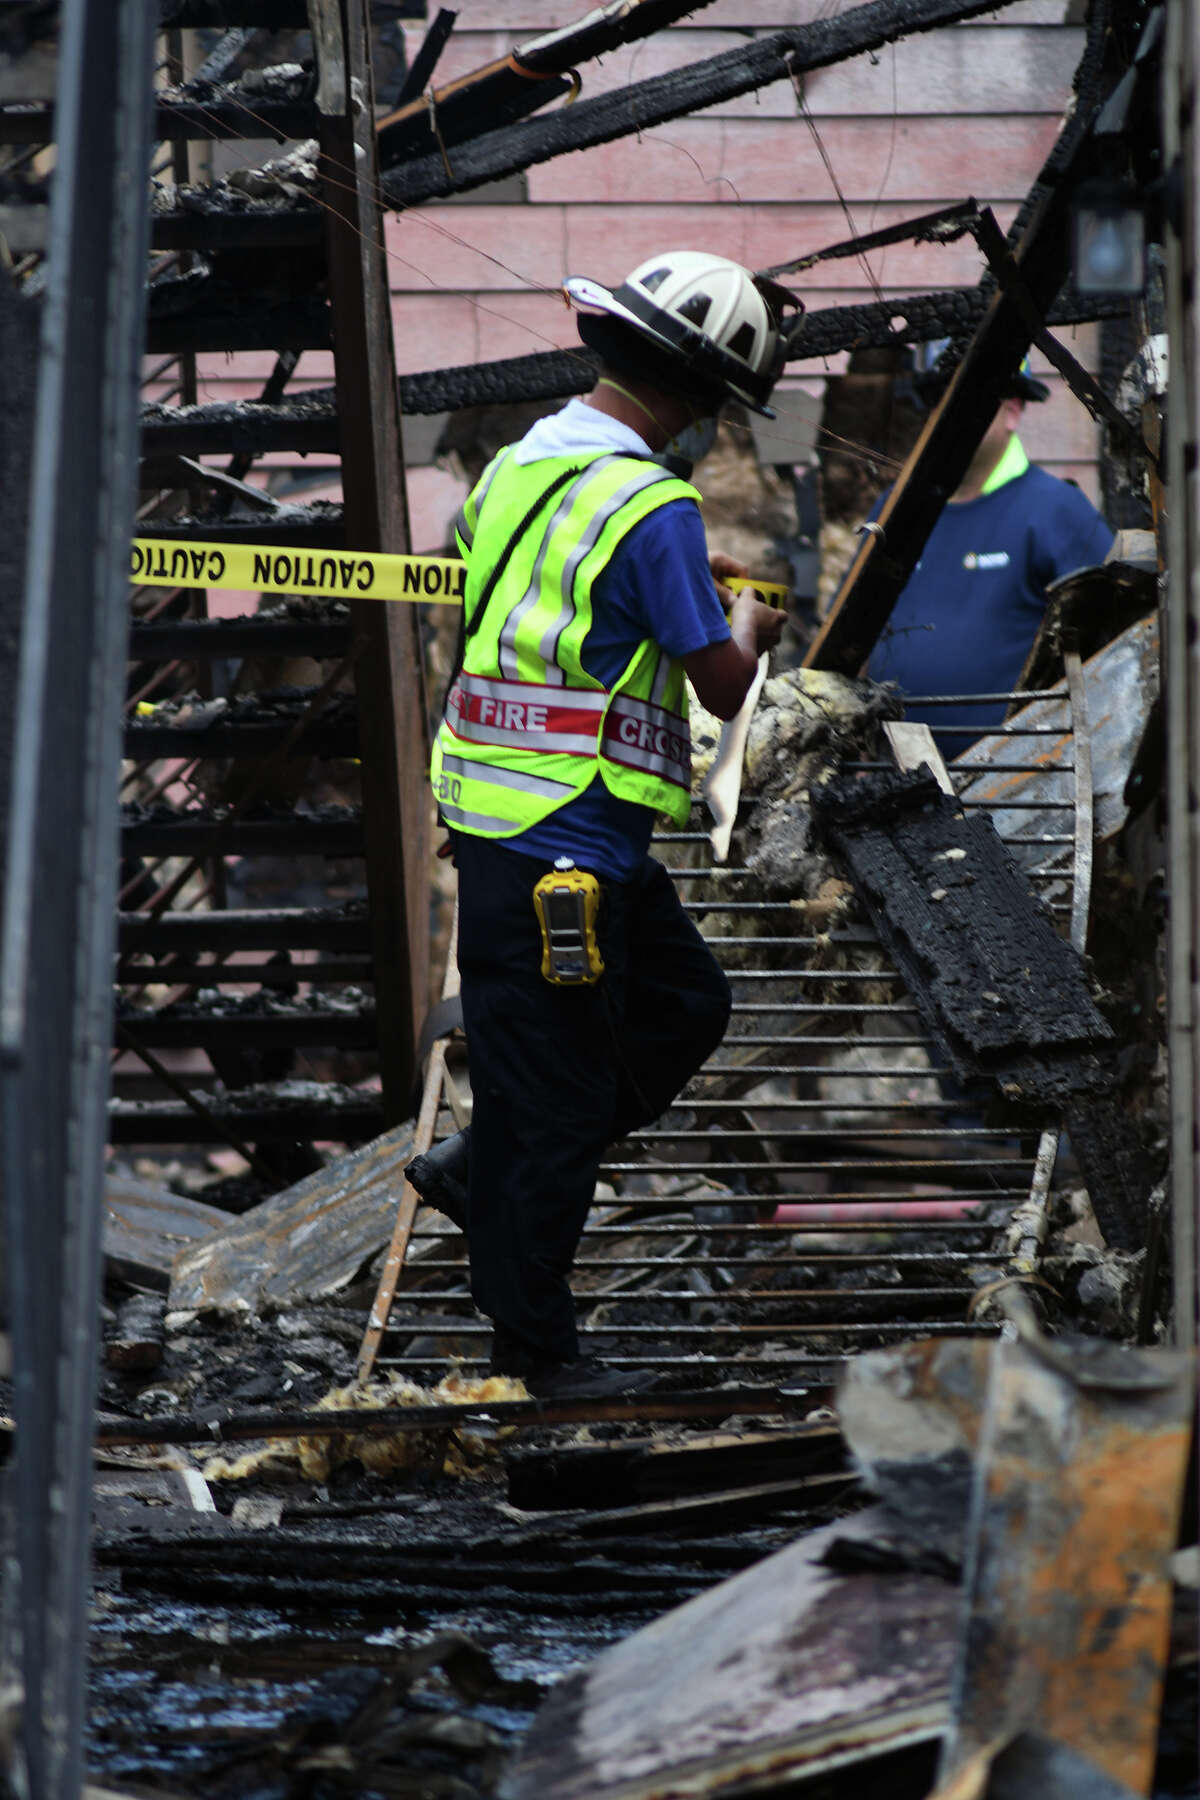 ﻿Nine fire departments battled Saturday's fatal fire at the Crosby Square Apartment Homes. ﻿﻿